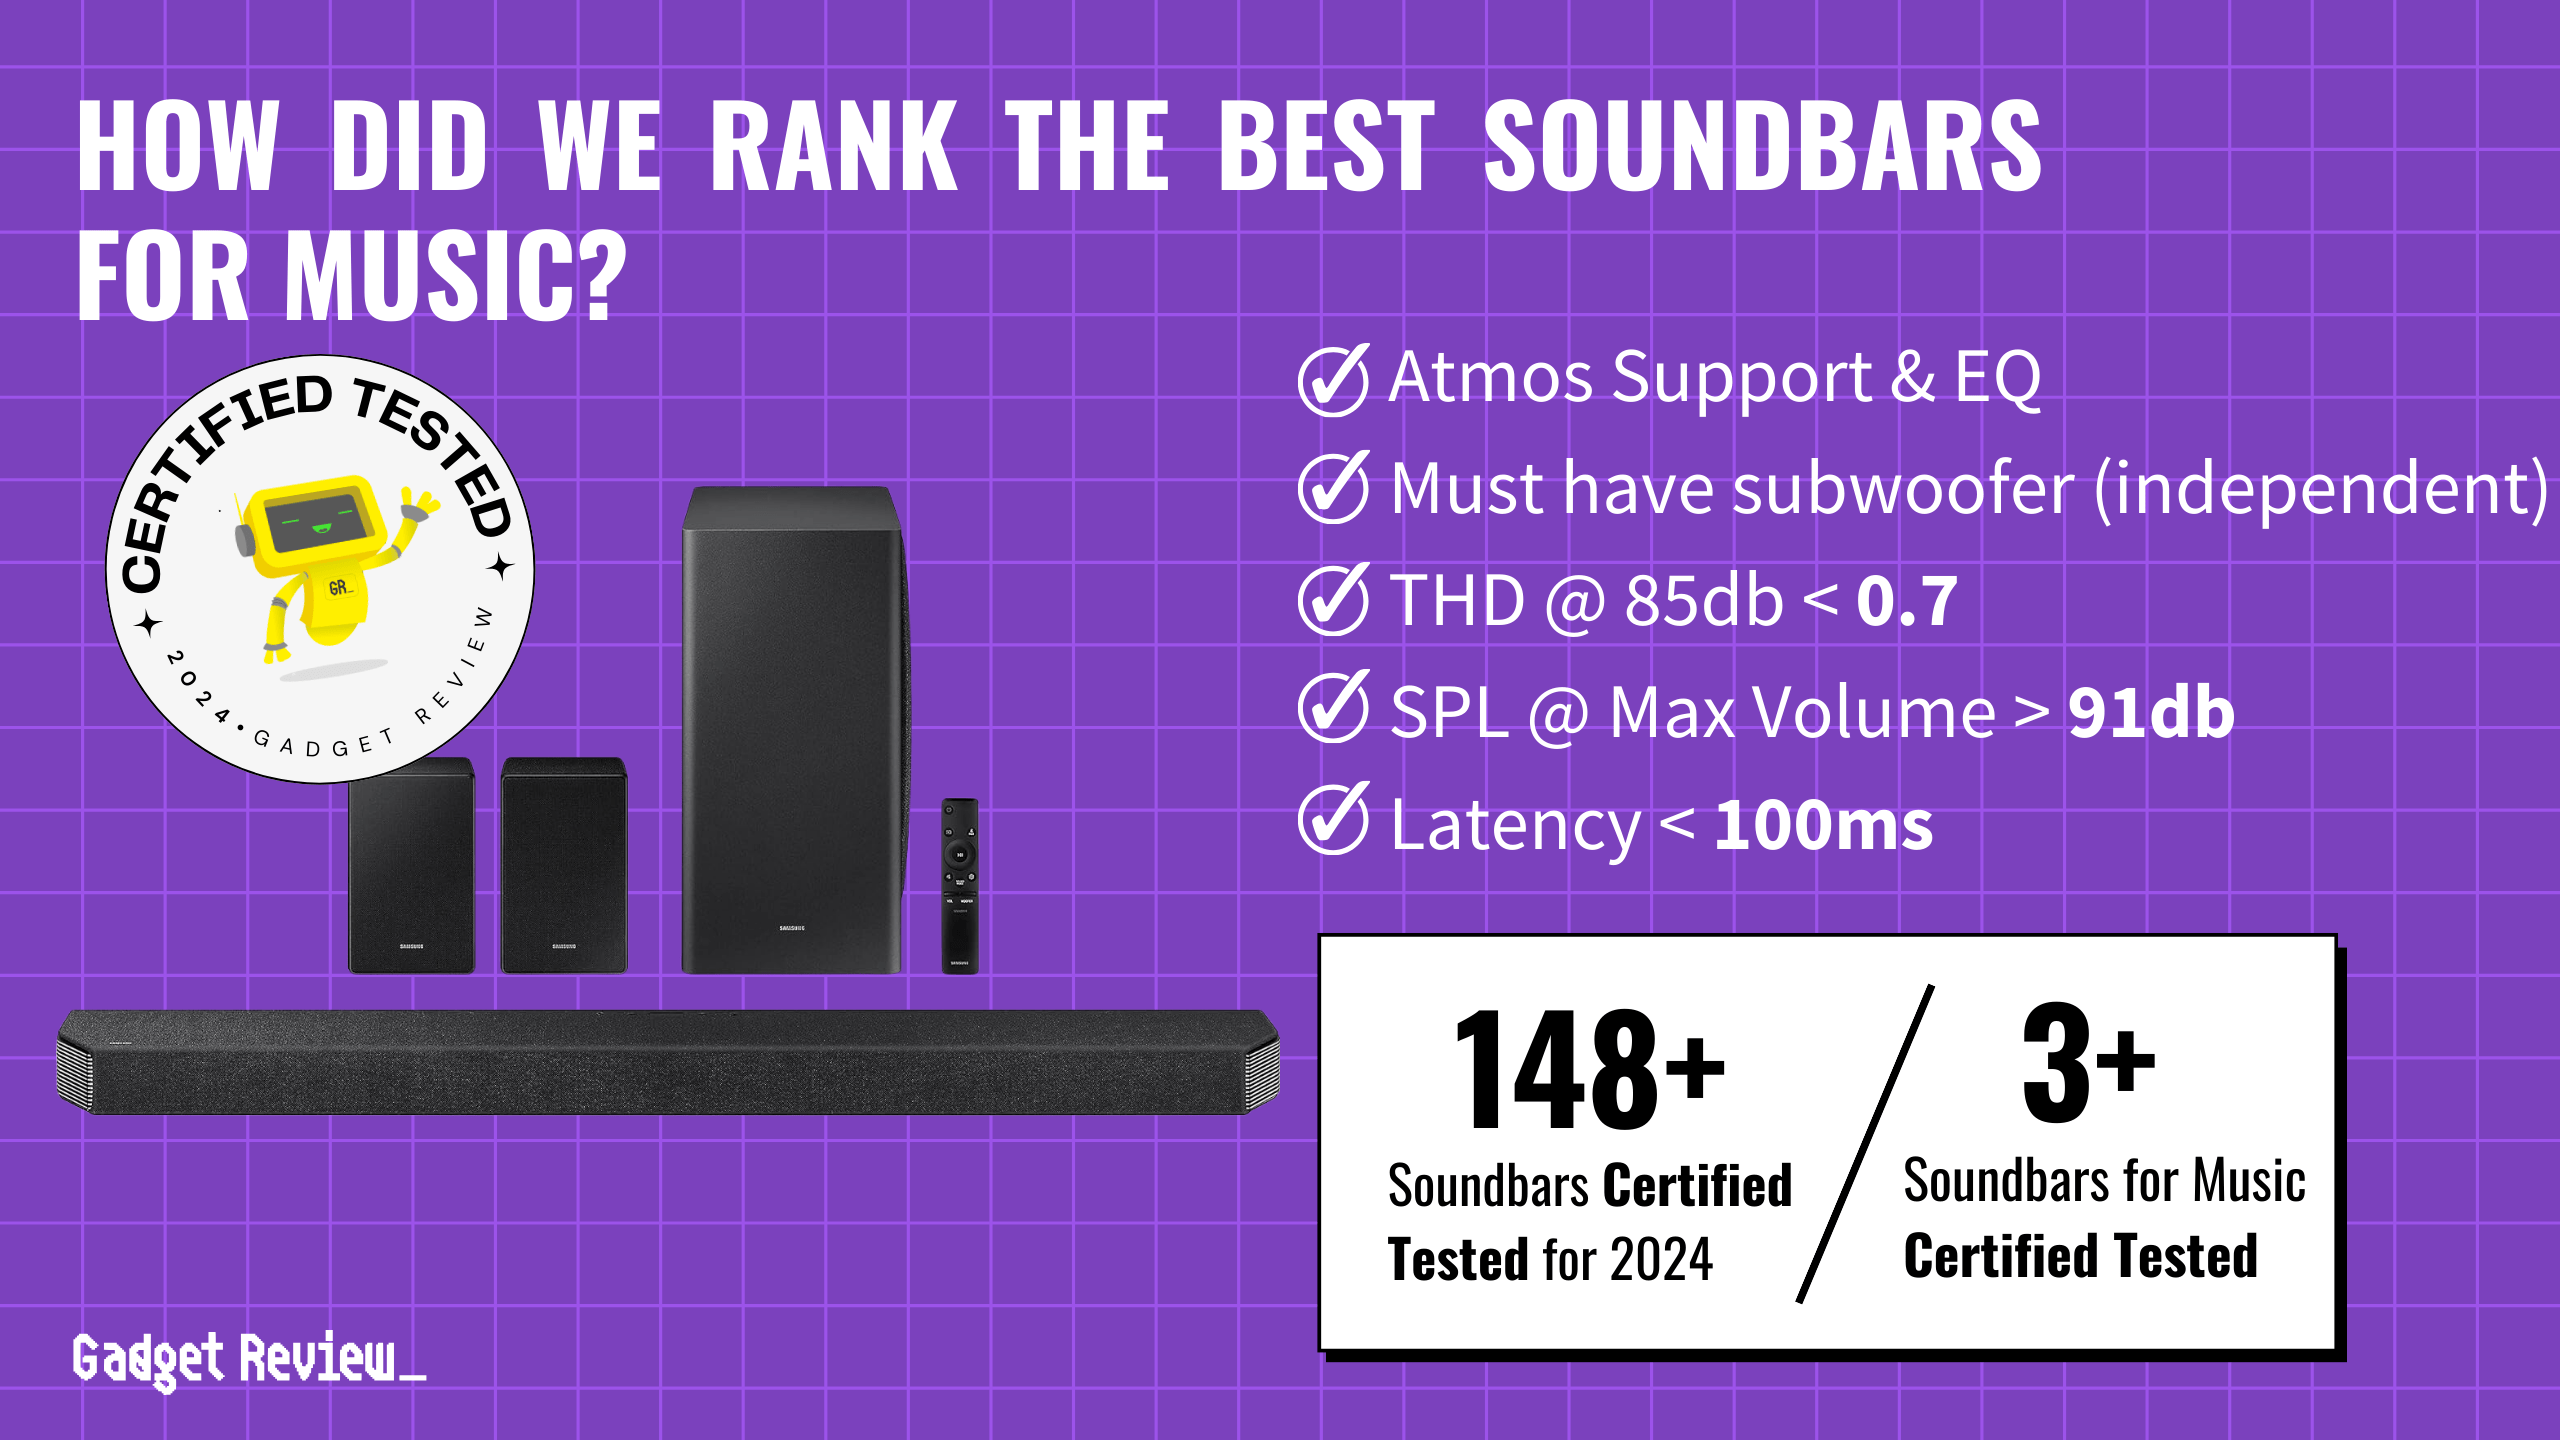 What Are The 3 Top Soundbars For Music?